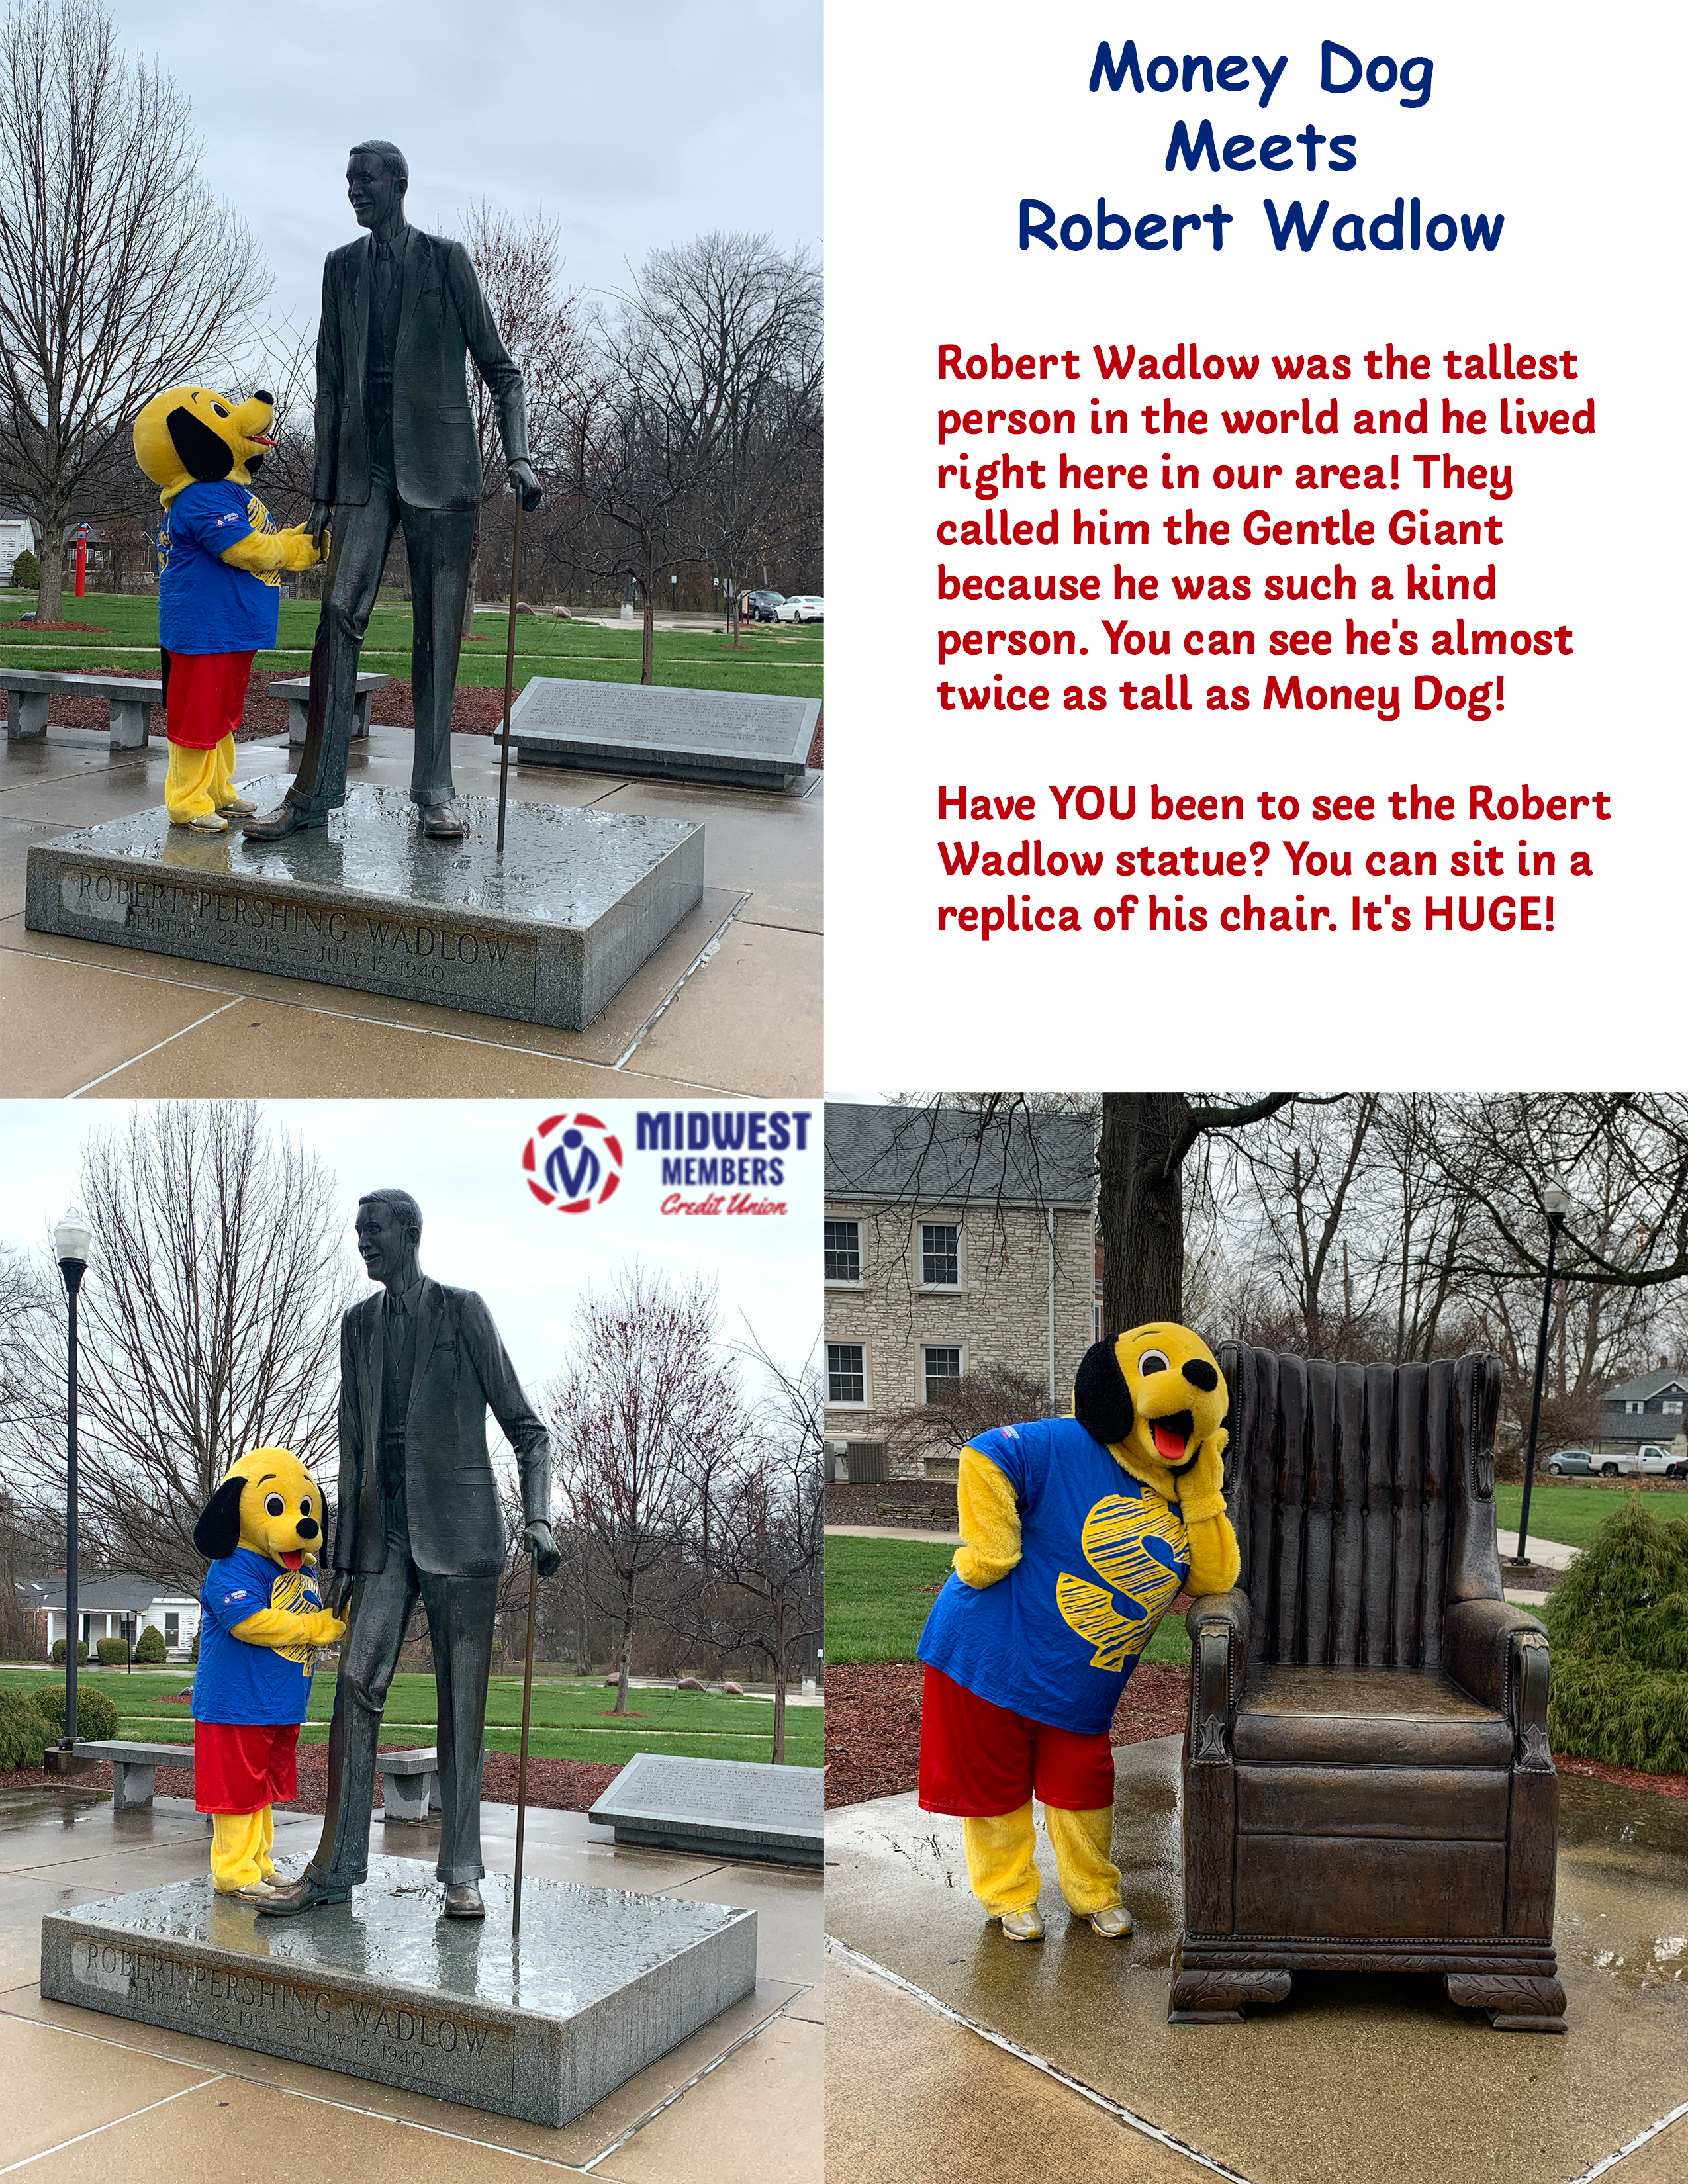 Money Dog Meets Robert Wadlow Robert Wadlow was the tallest person in the world and he lived right here in our area! They called him the gentle giant because he was such a kind person. You can see he's almost twice as tall as money dog! Have you been to see the robert wadlow statue? You can sit in a replica of his chair. It's huge!